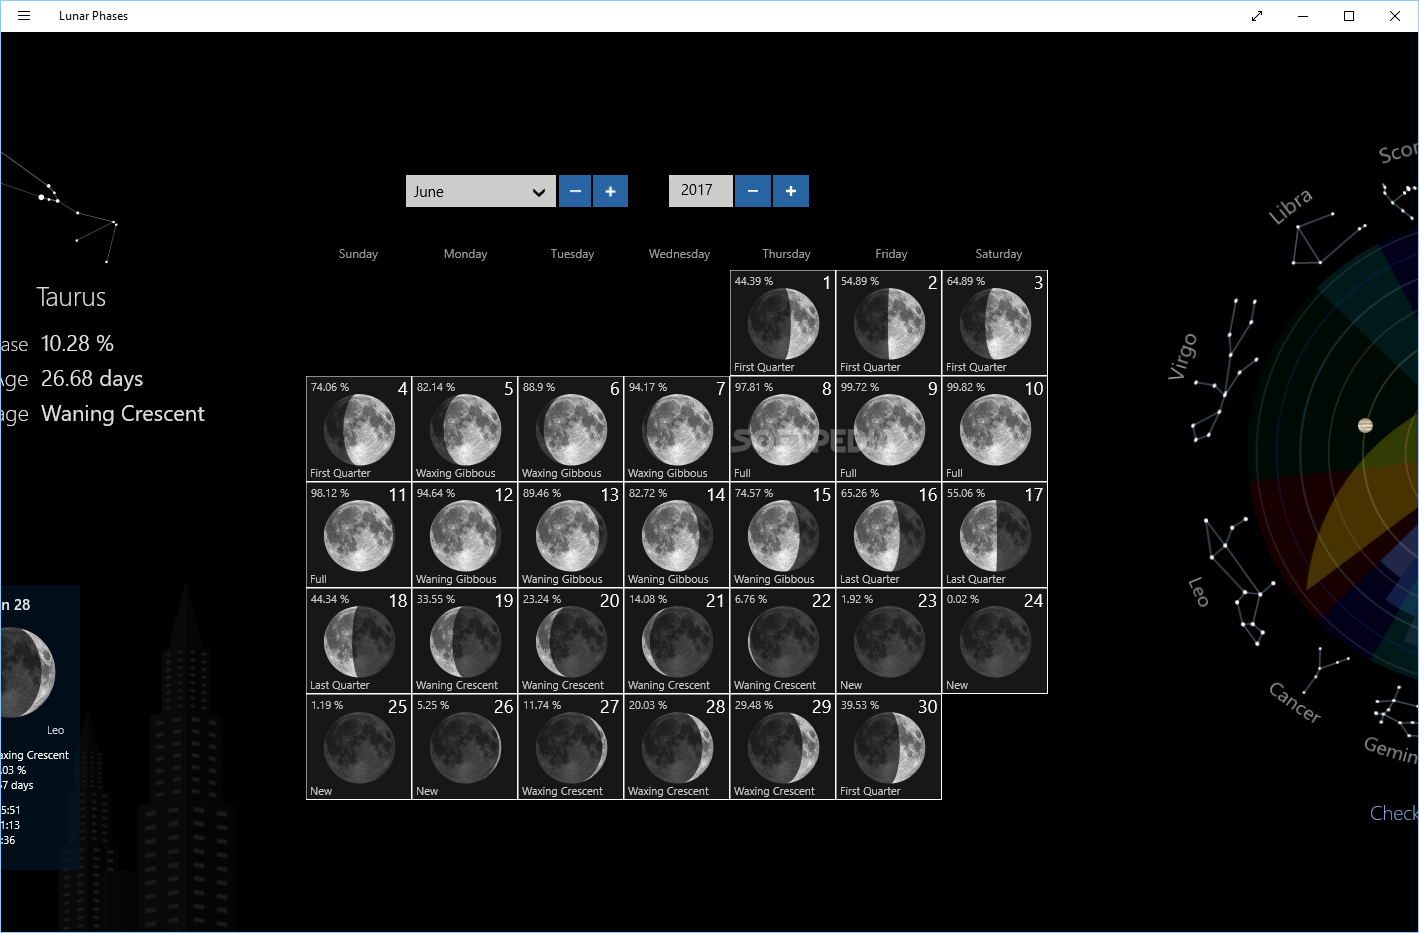 Lunar Phases Download View information about the Moon's phases, as